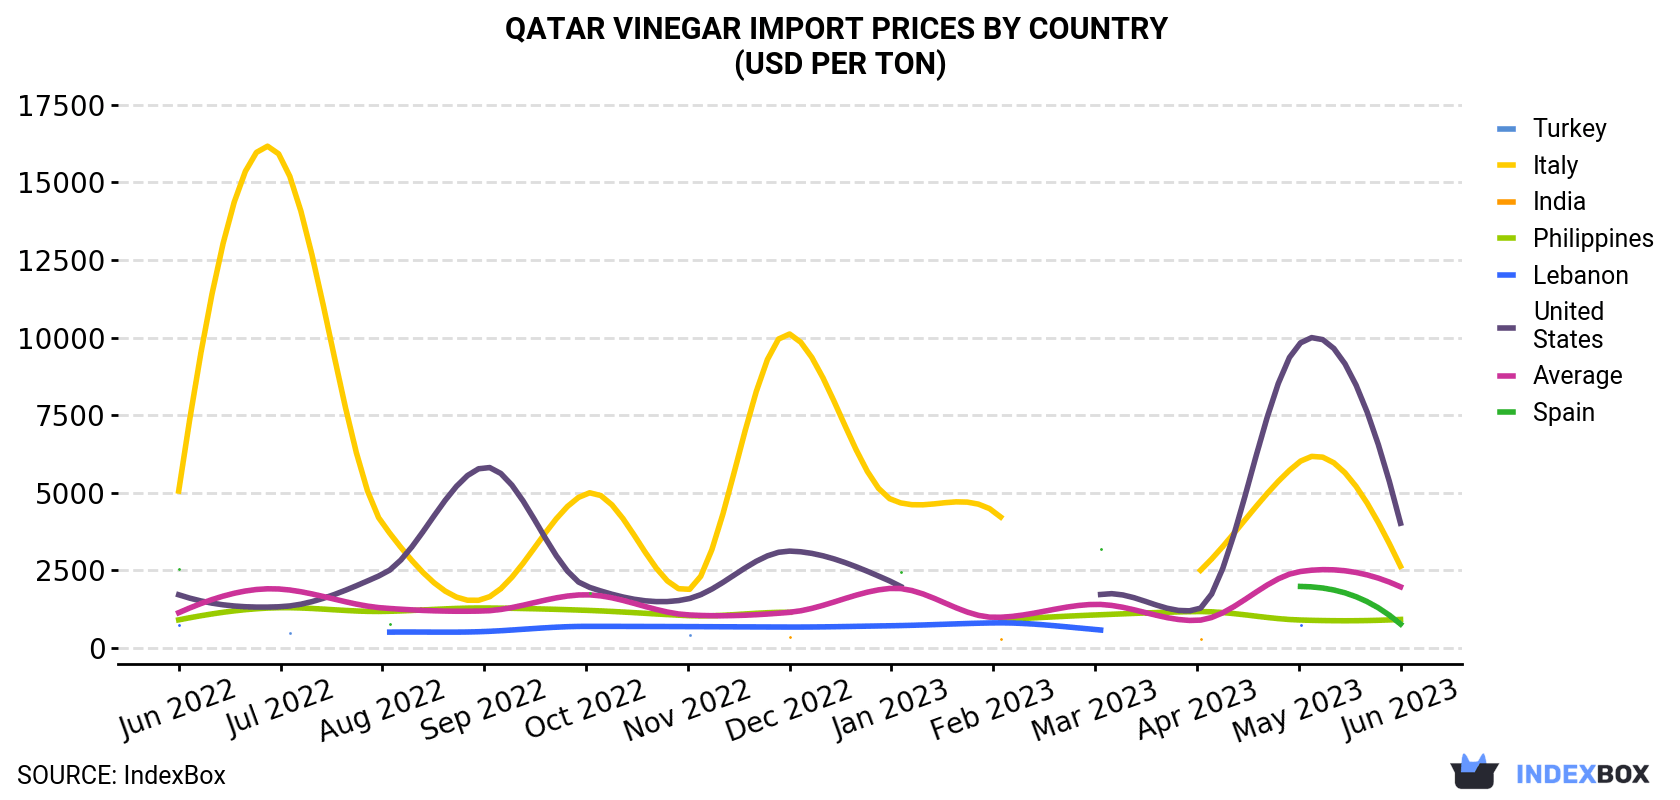 Qatar Vinegar Import Prices By Country (USD Per Ton)